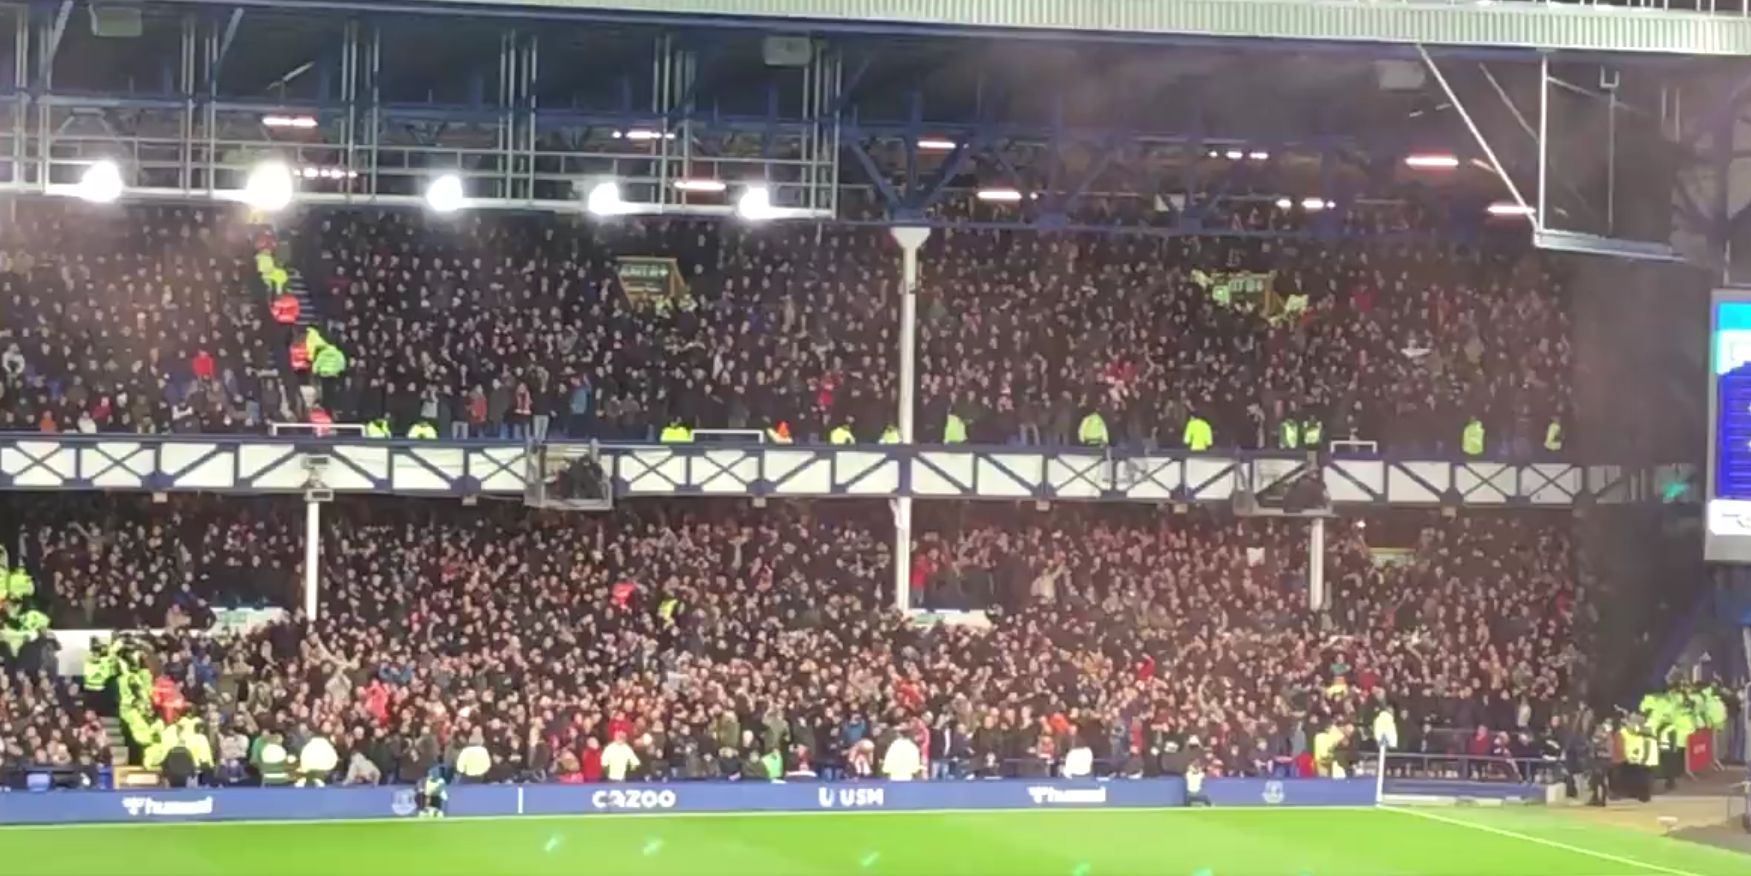 (Video) Watch as Liverpool fans let out a chorus of “Rafa Benitez” after Mo Salah’s goal at Goodison Park